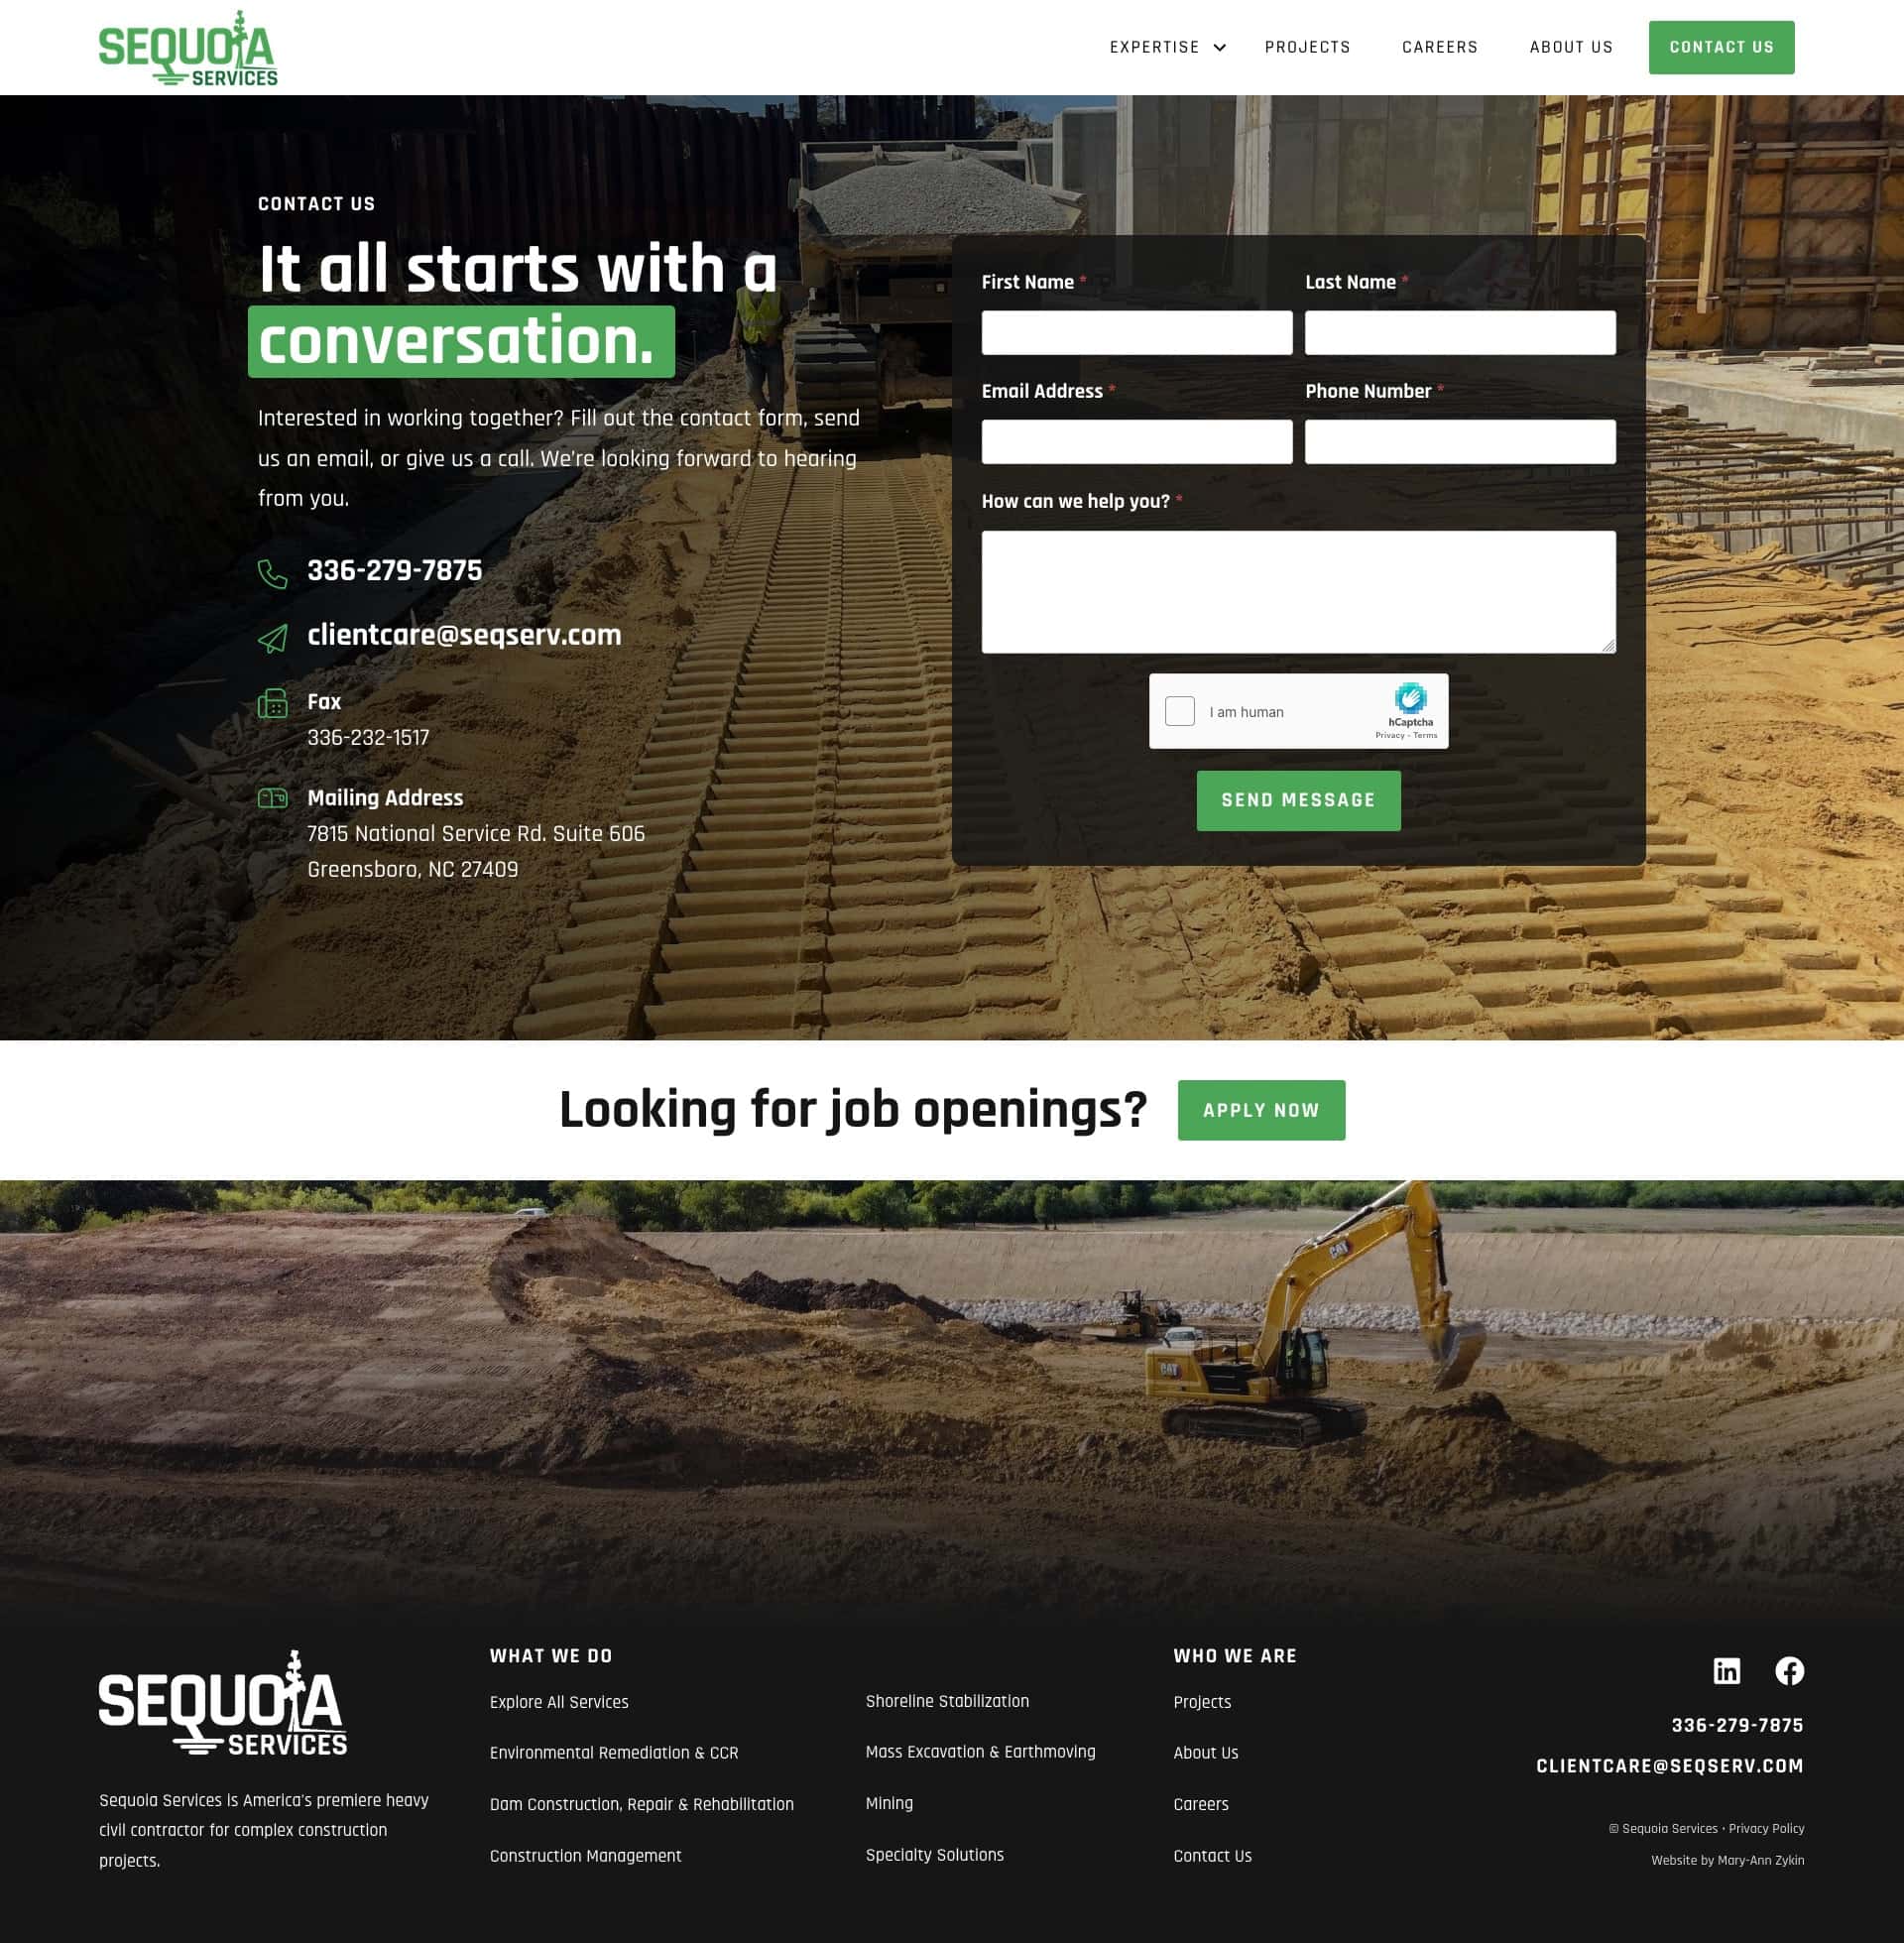 Sequoia Services Contact Page